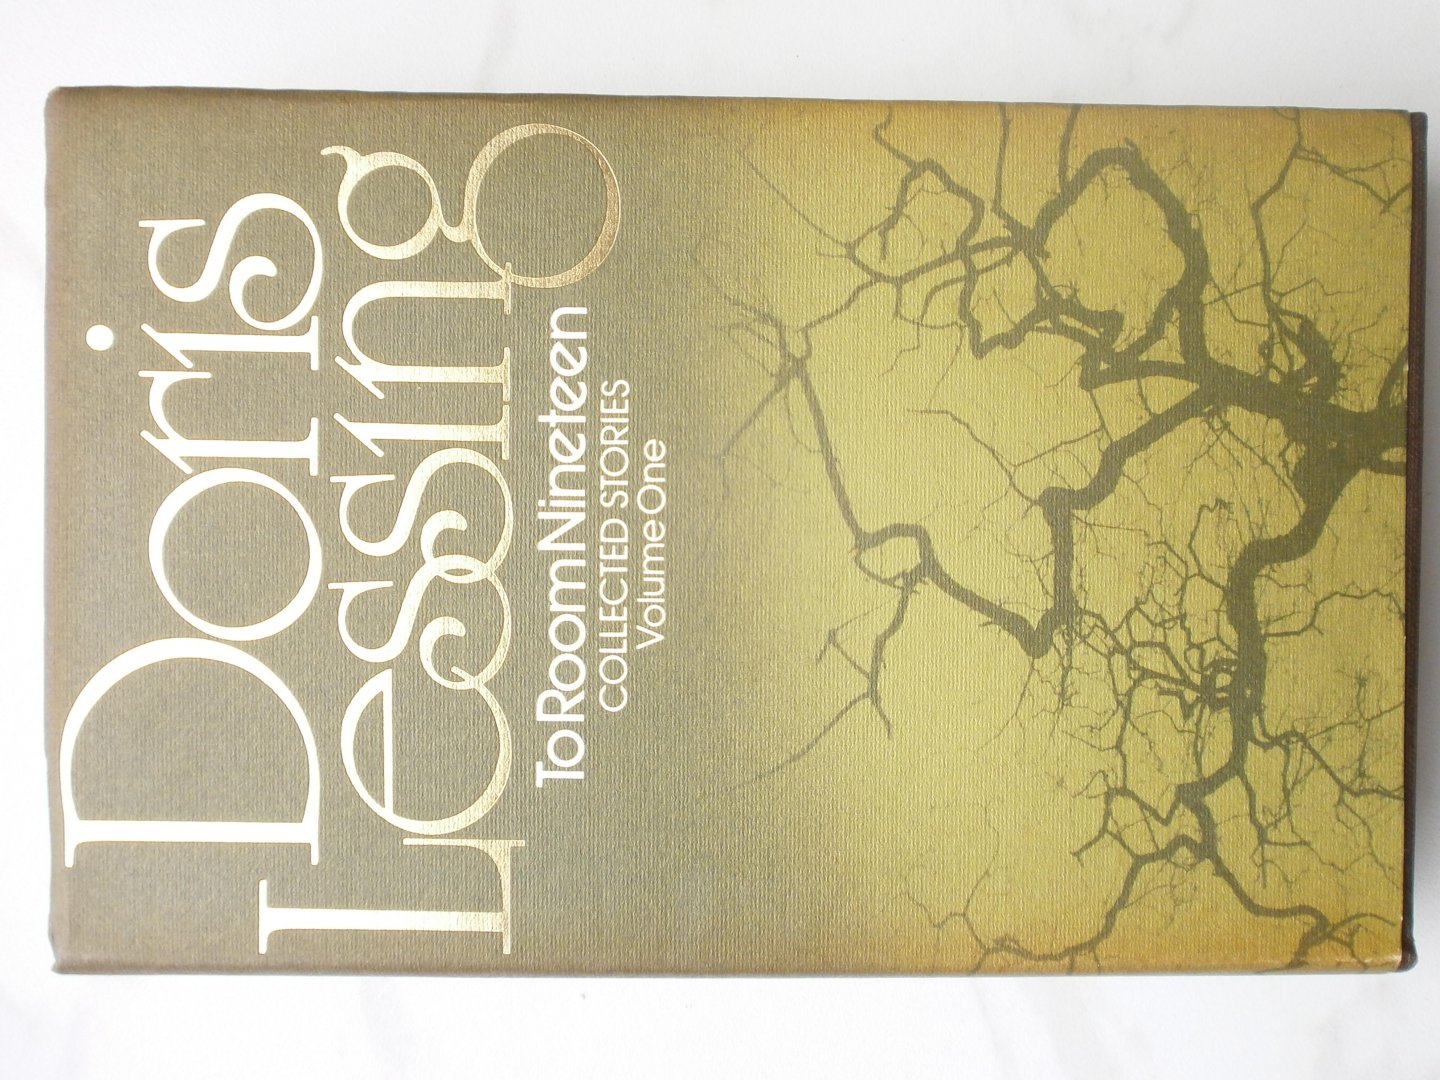 Lessing; Doris - To room nighteen, collected stories part 1